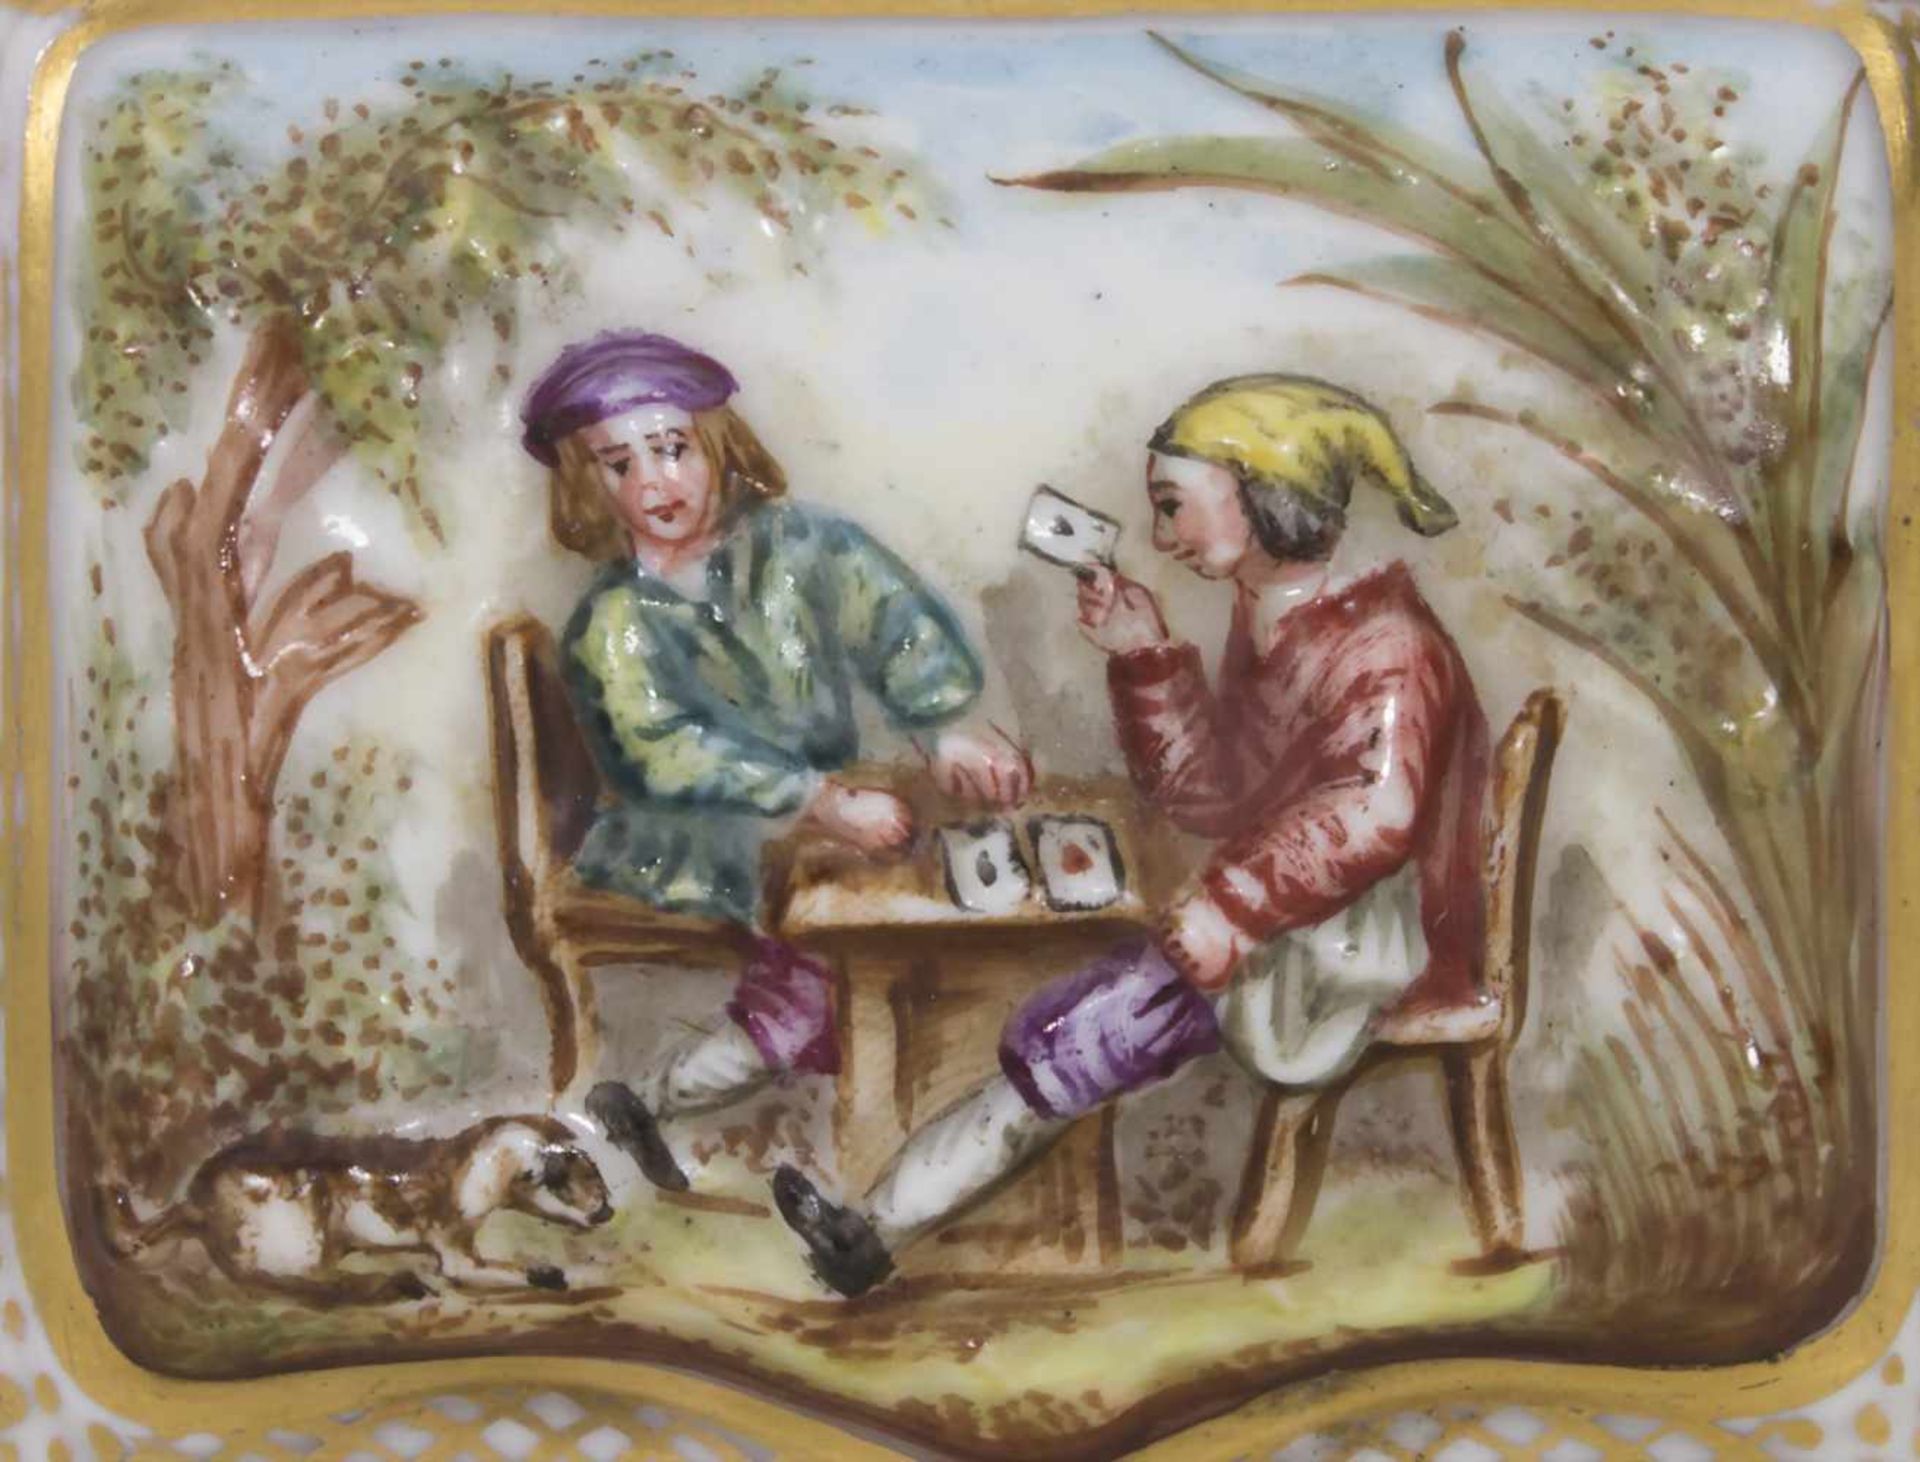 Deckeldose / Tabatiere mit Kartenspielern und Jagdszenen / A snuff box with card players and hunting - Image 6 of 8